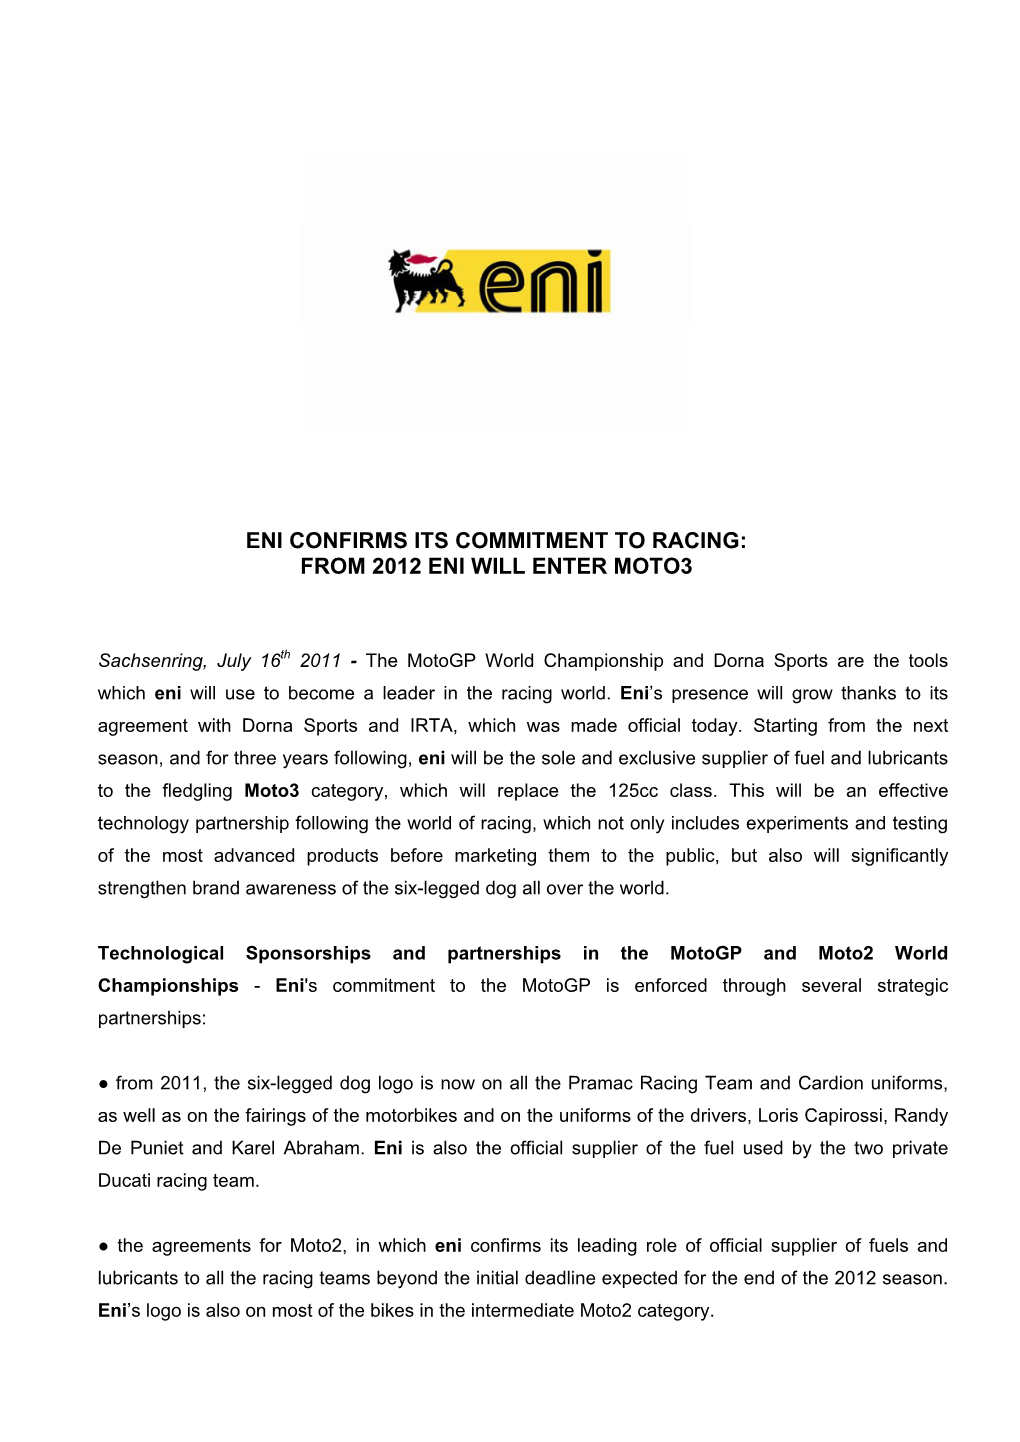 Eni Confirms Its Commitment to Racing: from 2012 Eni Will Enter Moto3